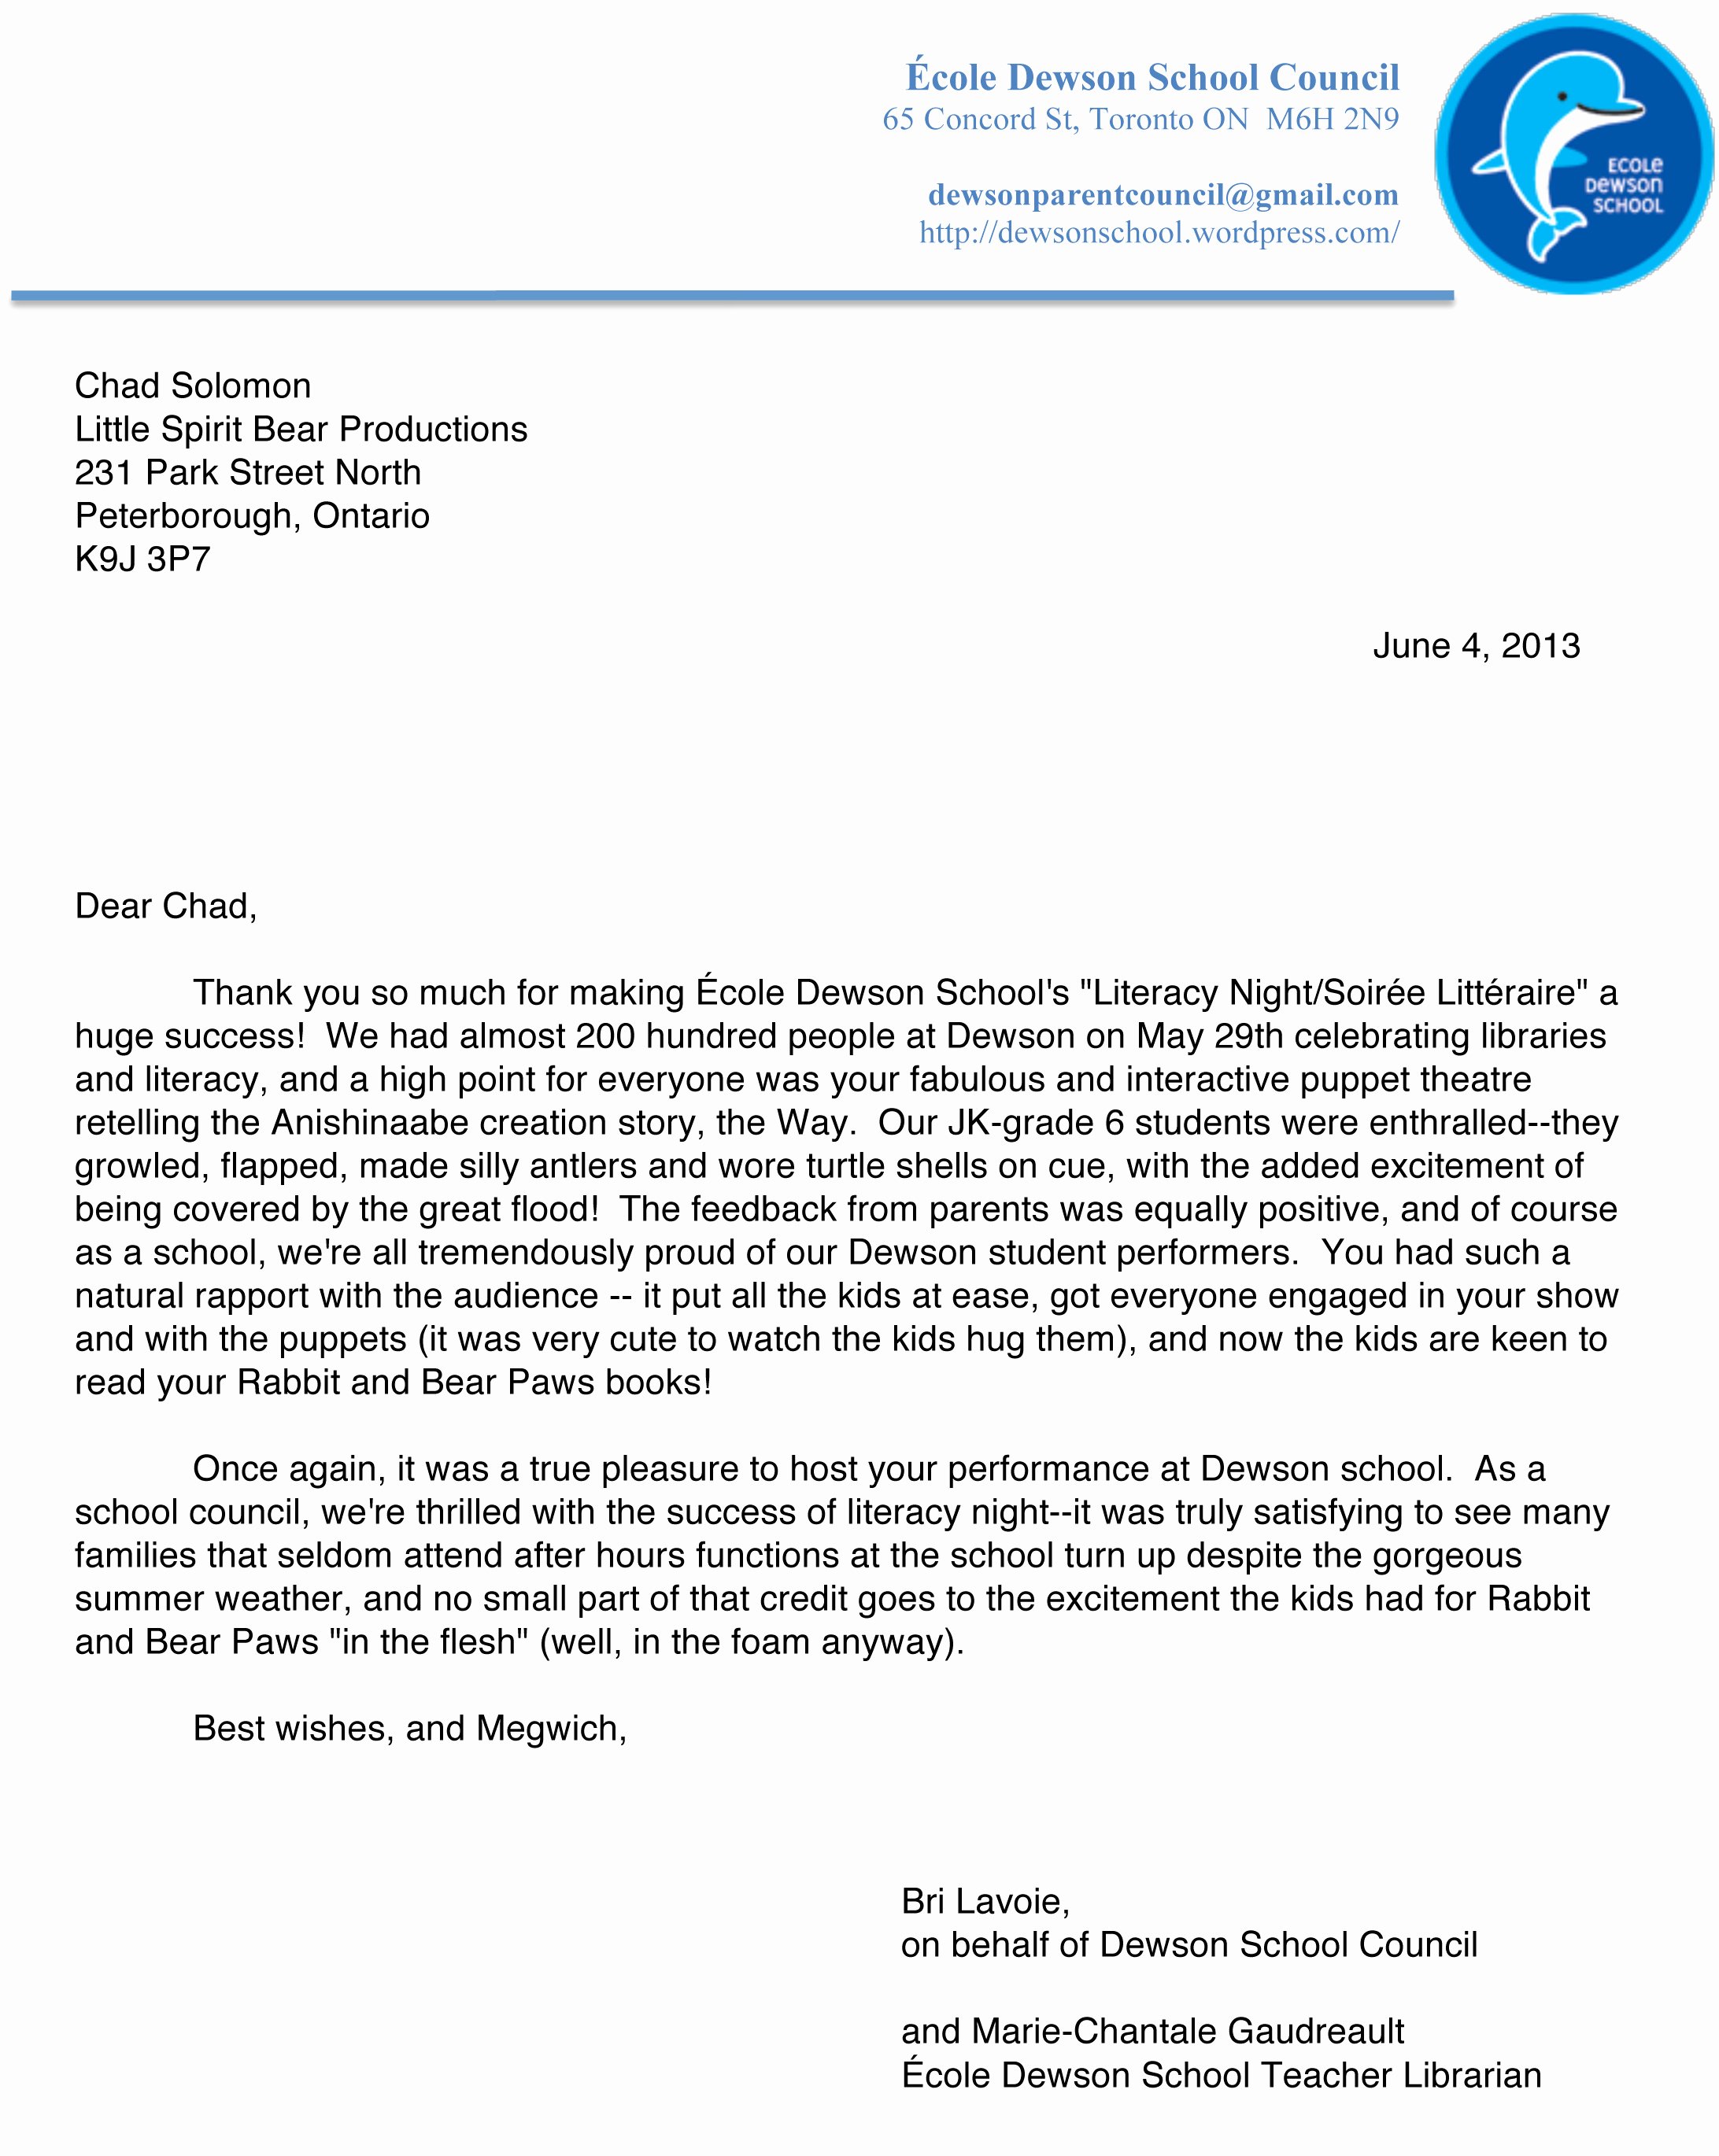 Emotional Support Animal Sample Letter for Flying Unique Rabbit and Bear Paws Presentations